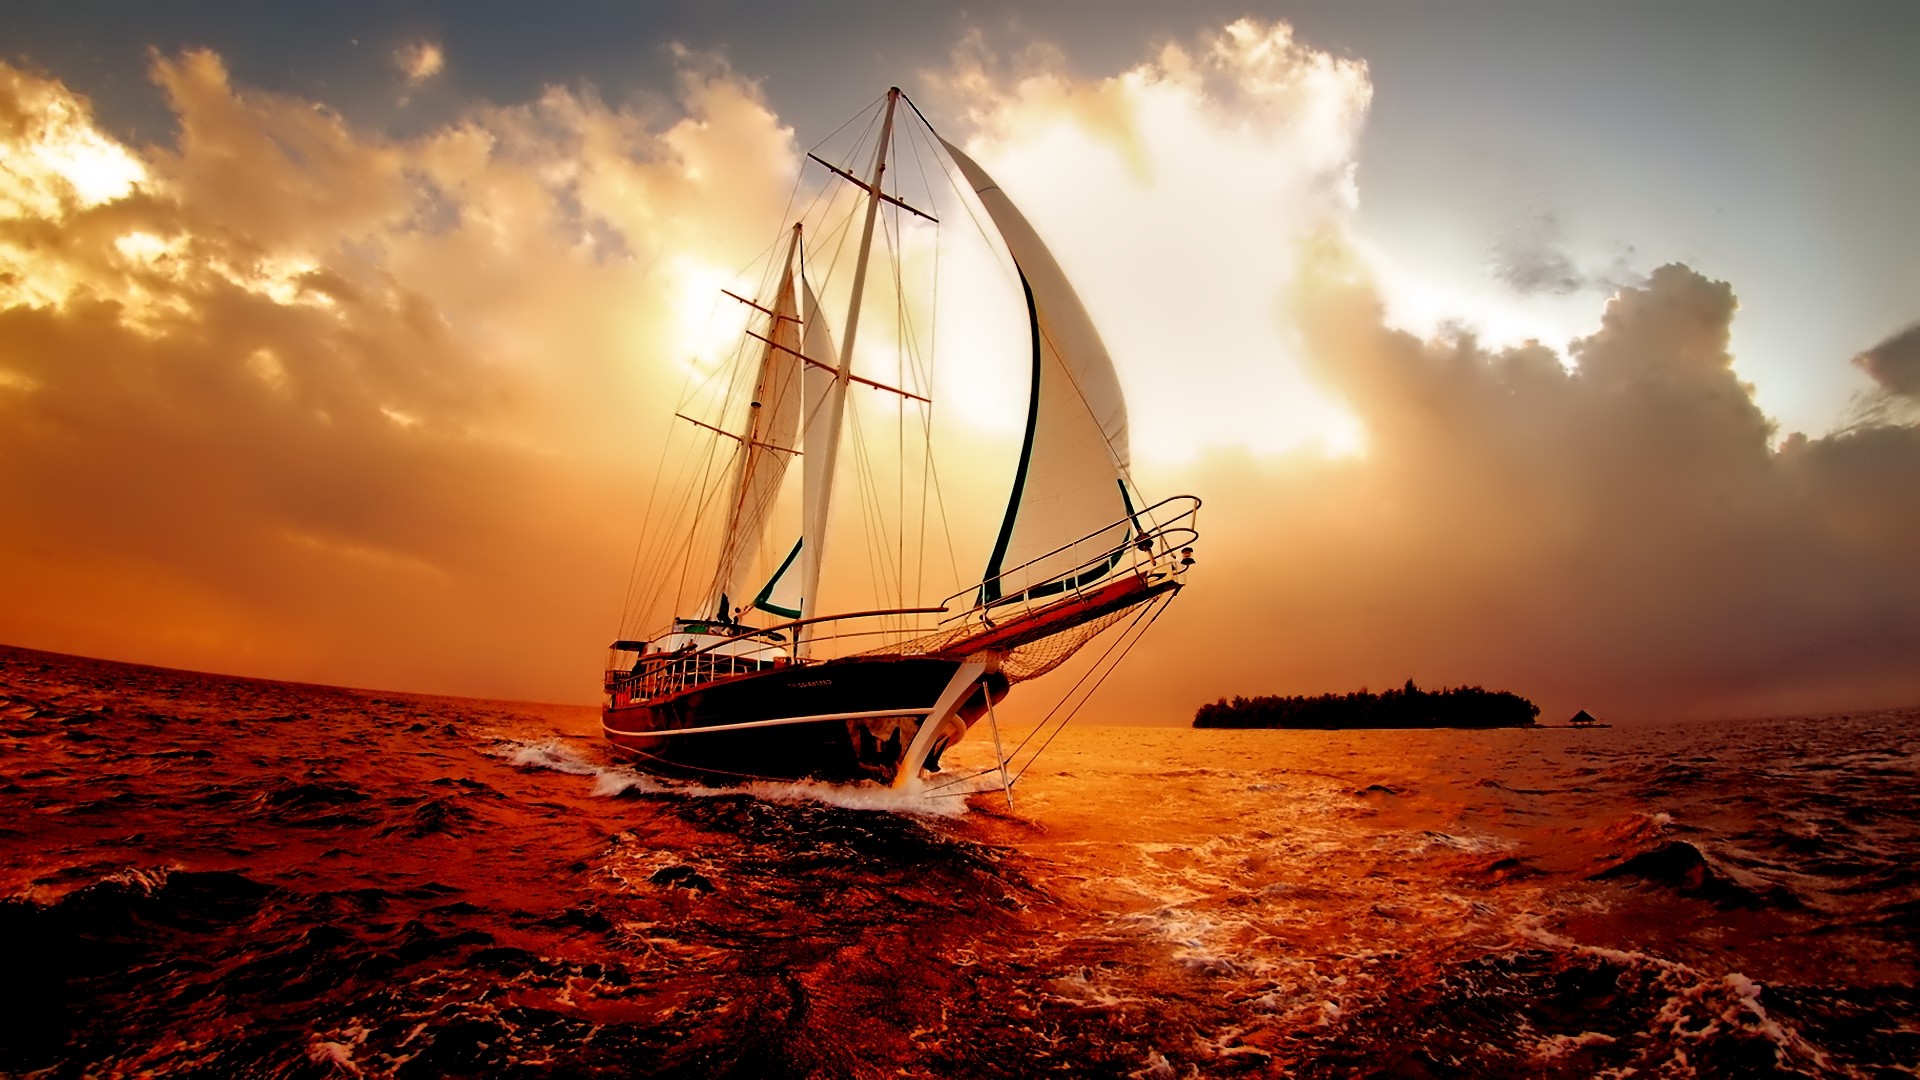 1920x1080 Fishing Boat Wallpaper Fishing Boat Image Galleries NMgnCP | HD Wallpapers  | Pinterest | Wallpaper and Wallpaper backgrounds